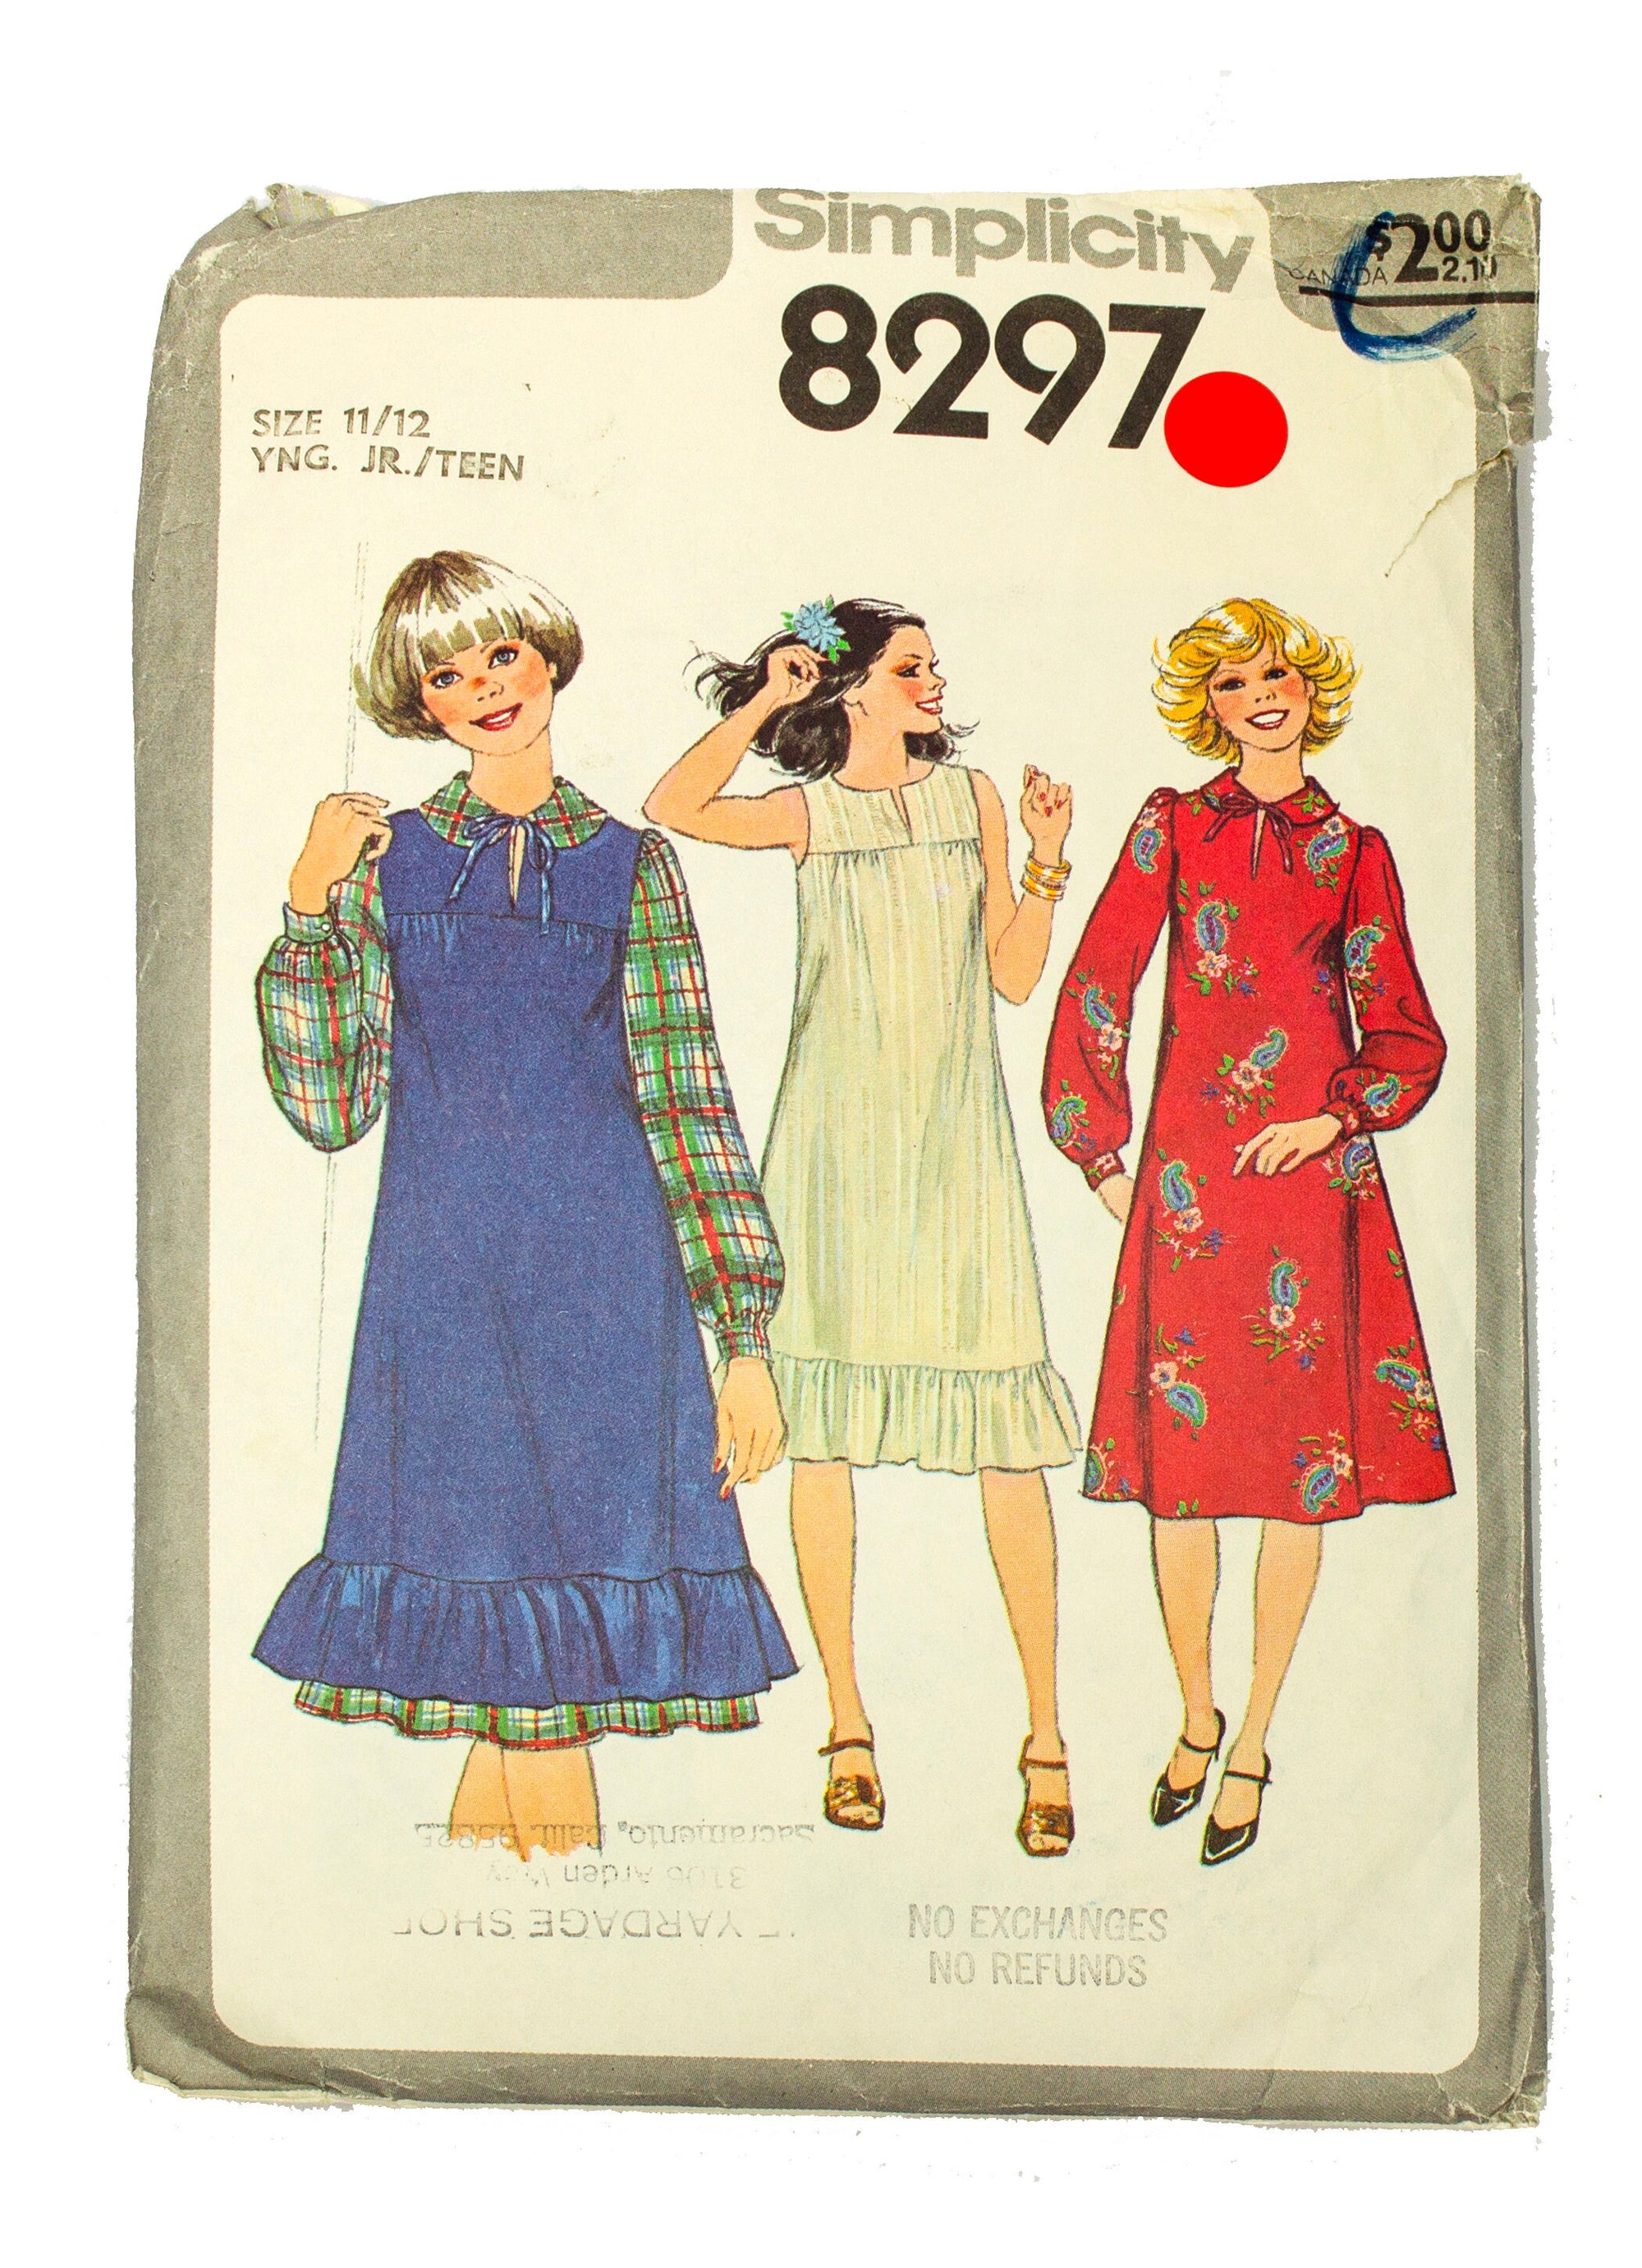 Simplicity 8297 Teen Pullover Dress and Jumper - Size 11/12